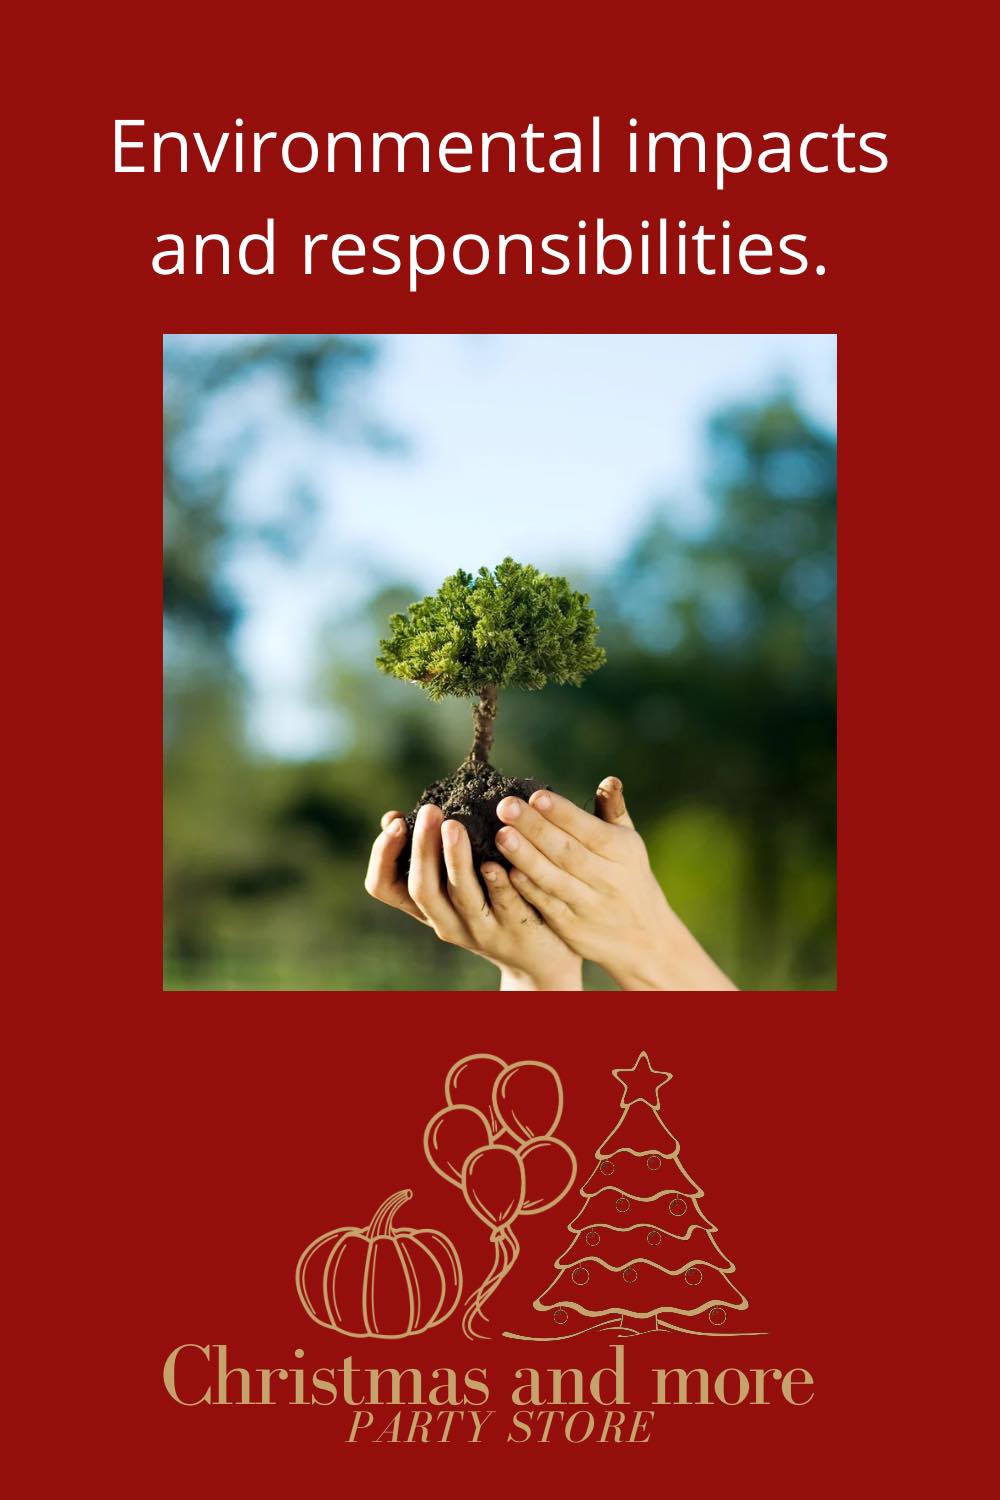 Environmental impacts and responsibilities